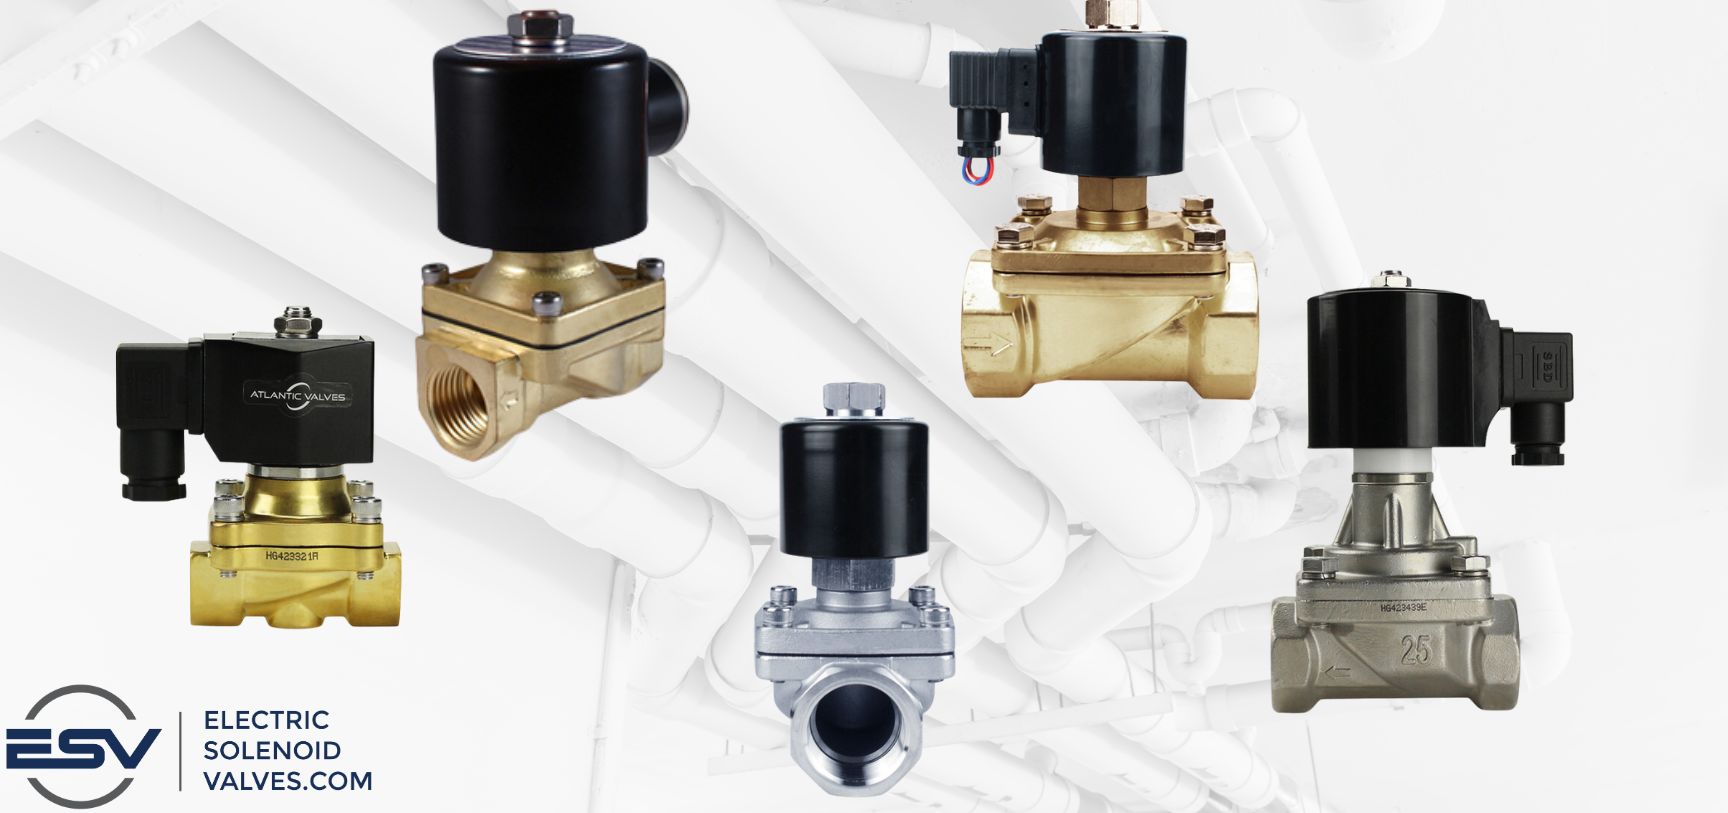 Assortment of different types of solenoid valves including brass, stainless steel, low pressure gas, and high temperature solenoid valves.